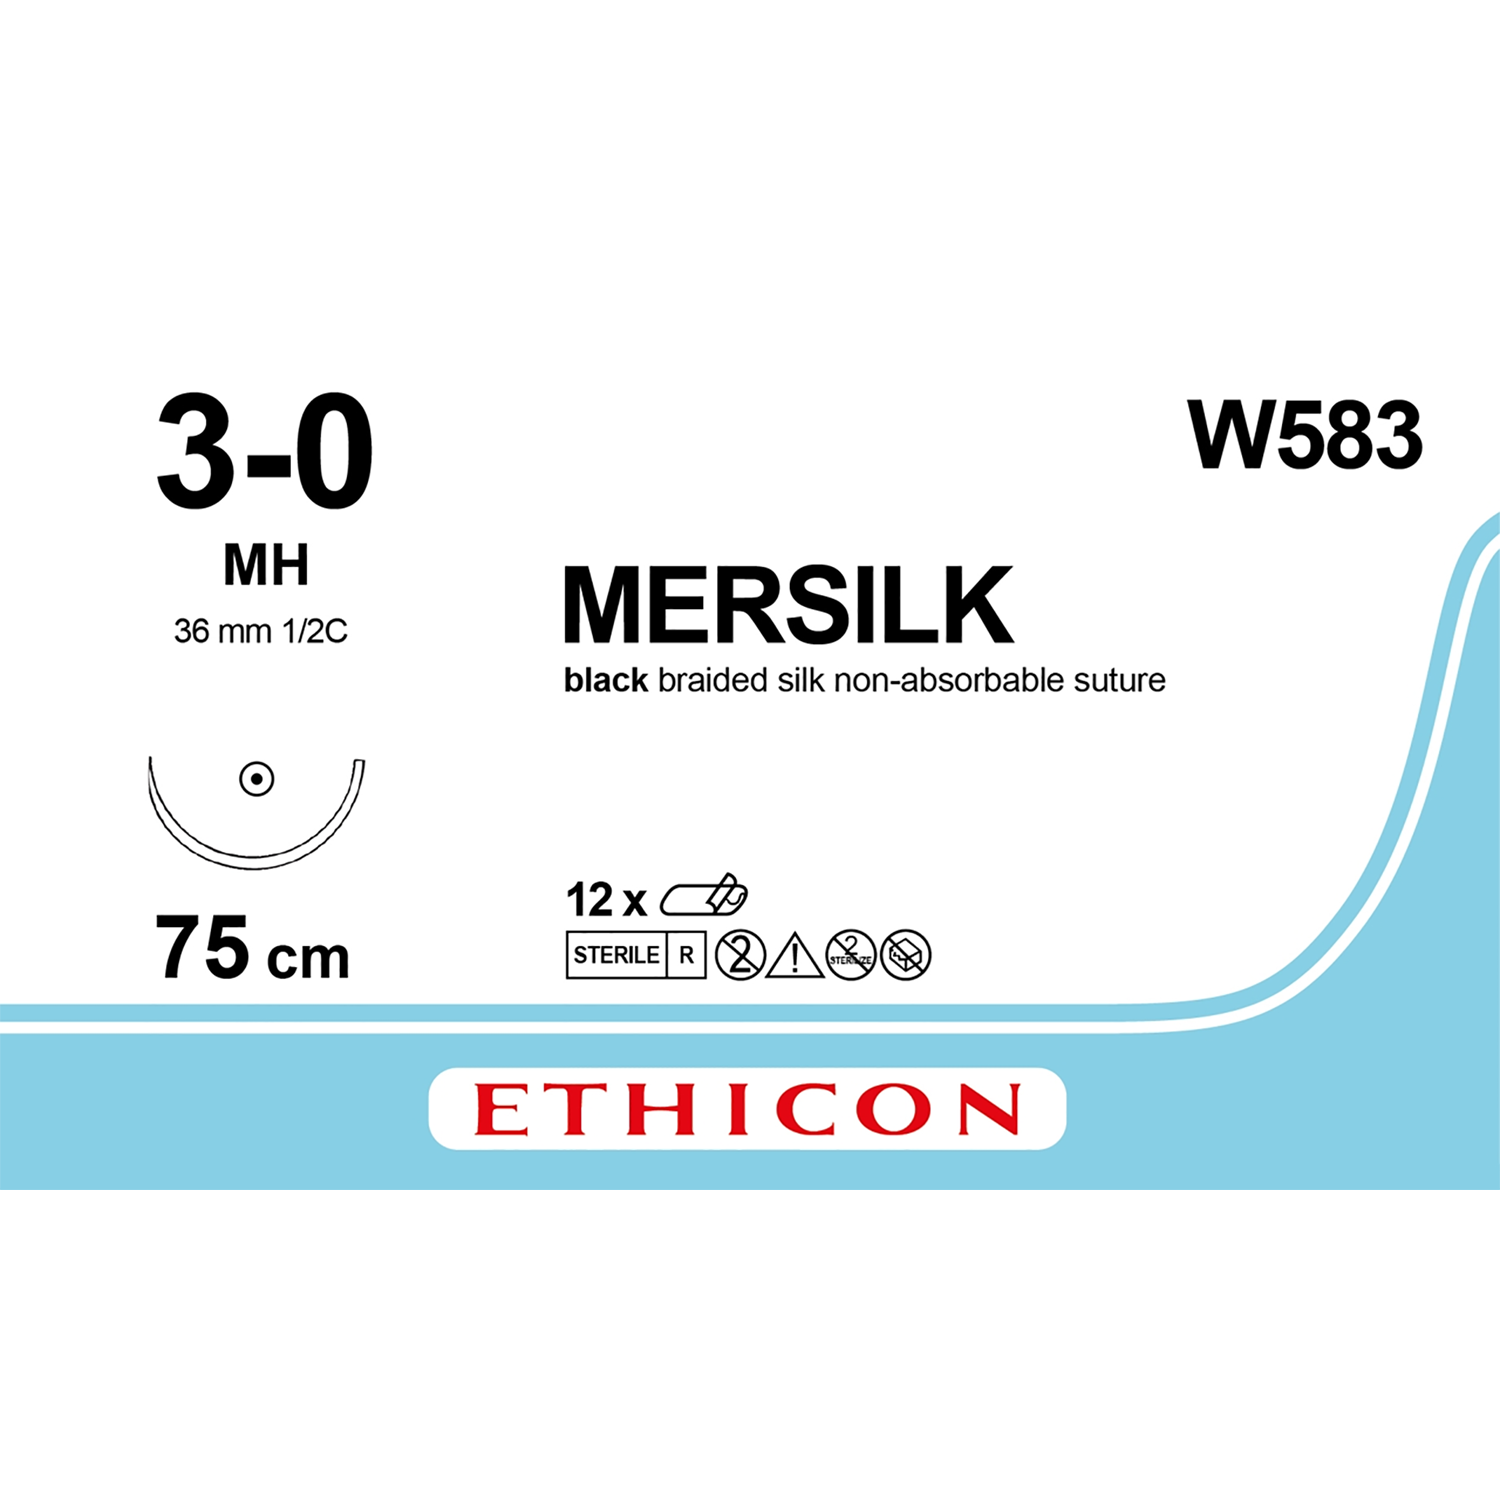 Ethicon Mersilk Suture | Non Absorbable | Black | Size: 3-0 | Length: 75cm | Needle: MH | Pack of 12